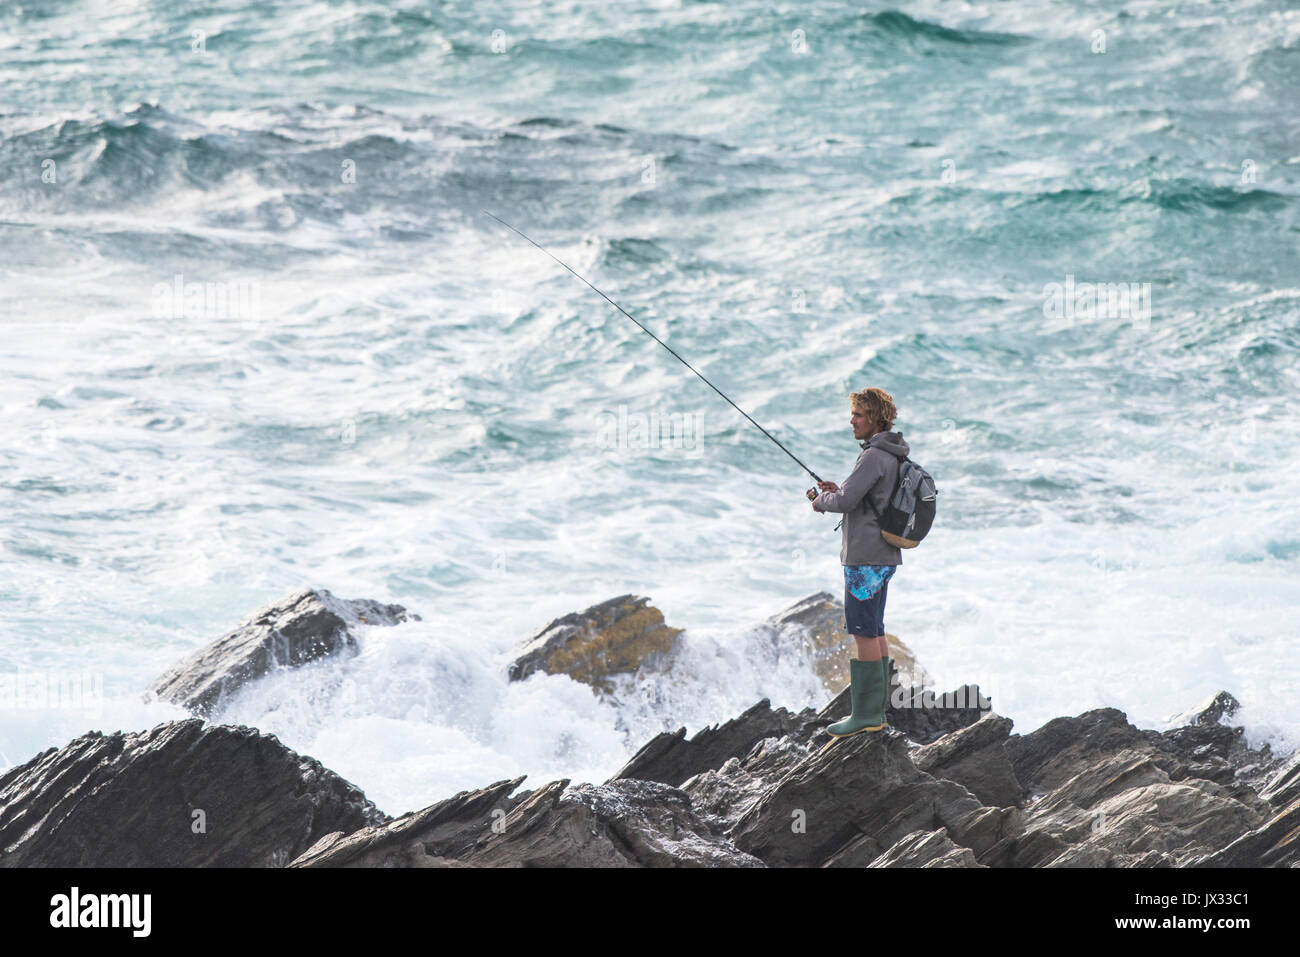 An angler fishing from rocks in Newquay, Cornwall. Stock Photo